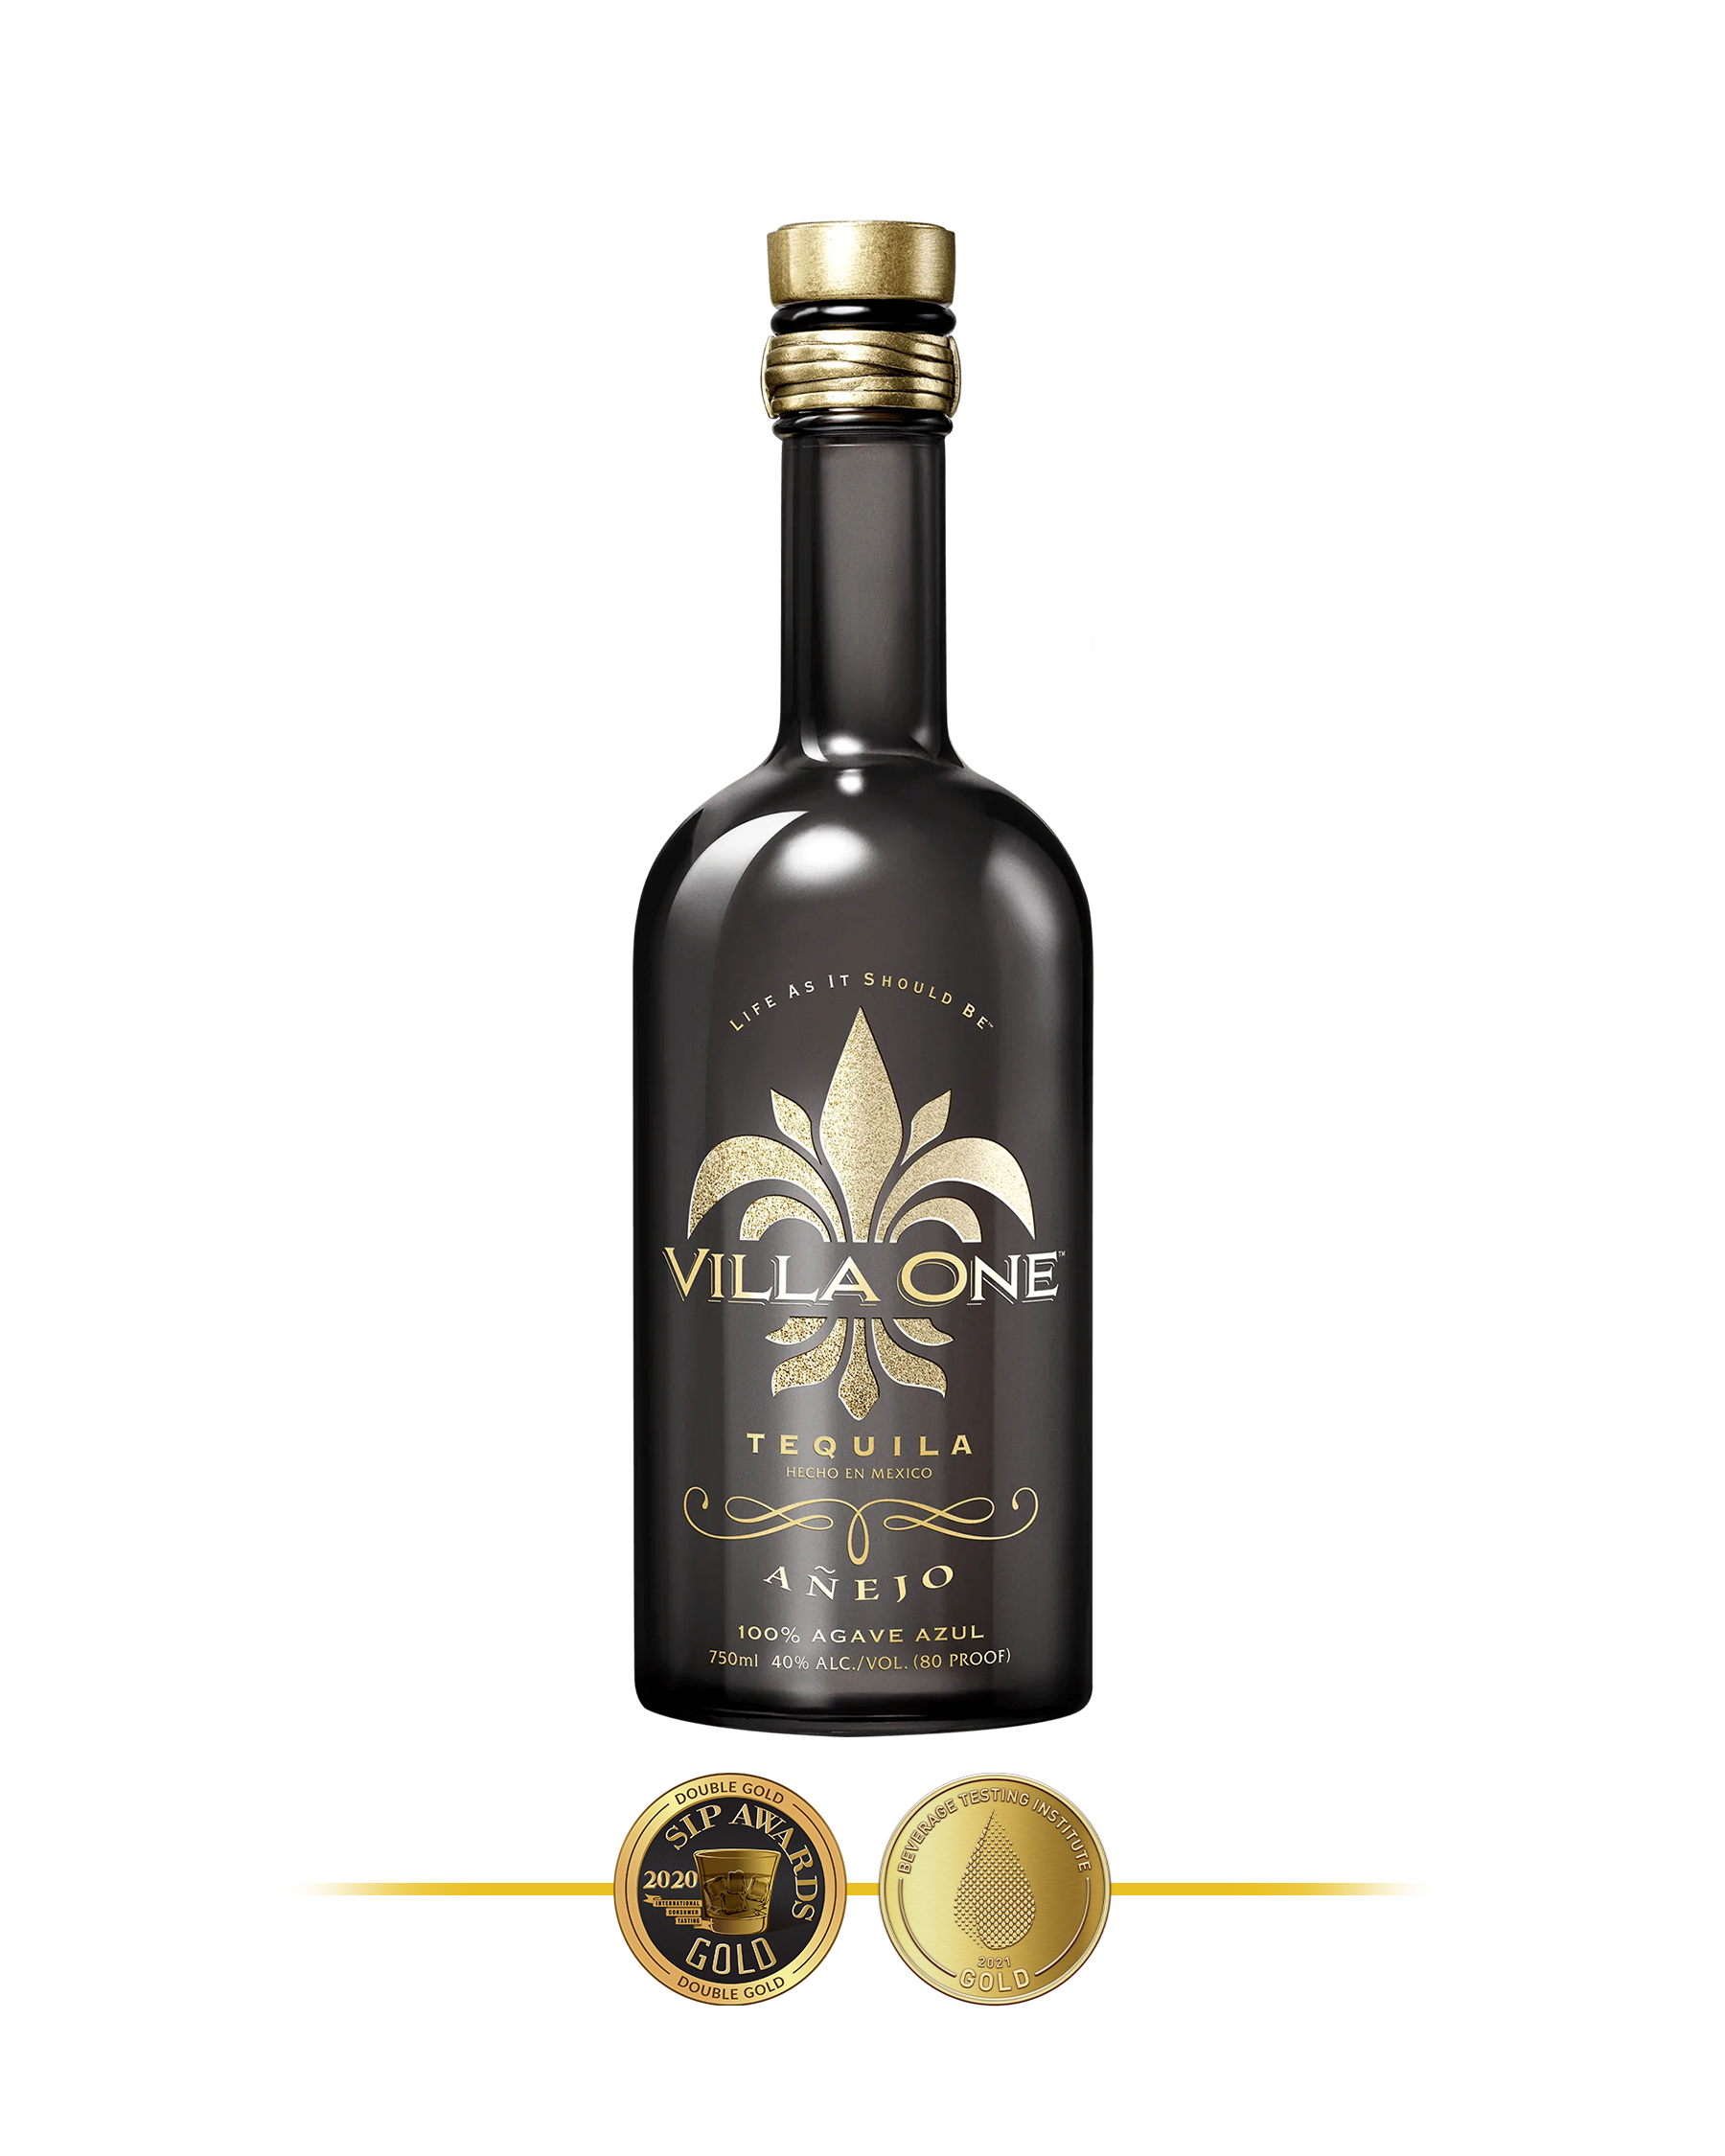 Villa One Tequila Añejo, winner of the SIP Awards Double-Gold and the BTI Award Gold